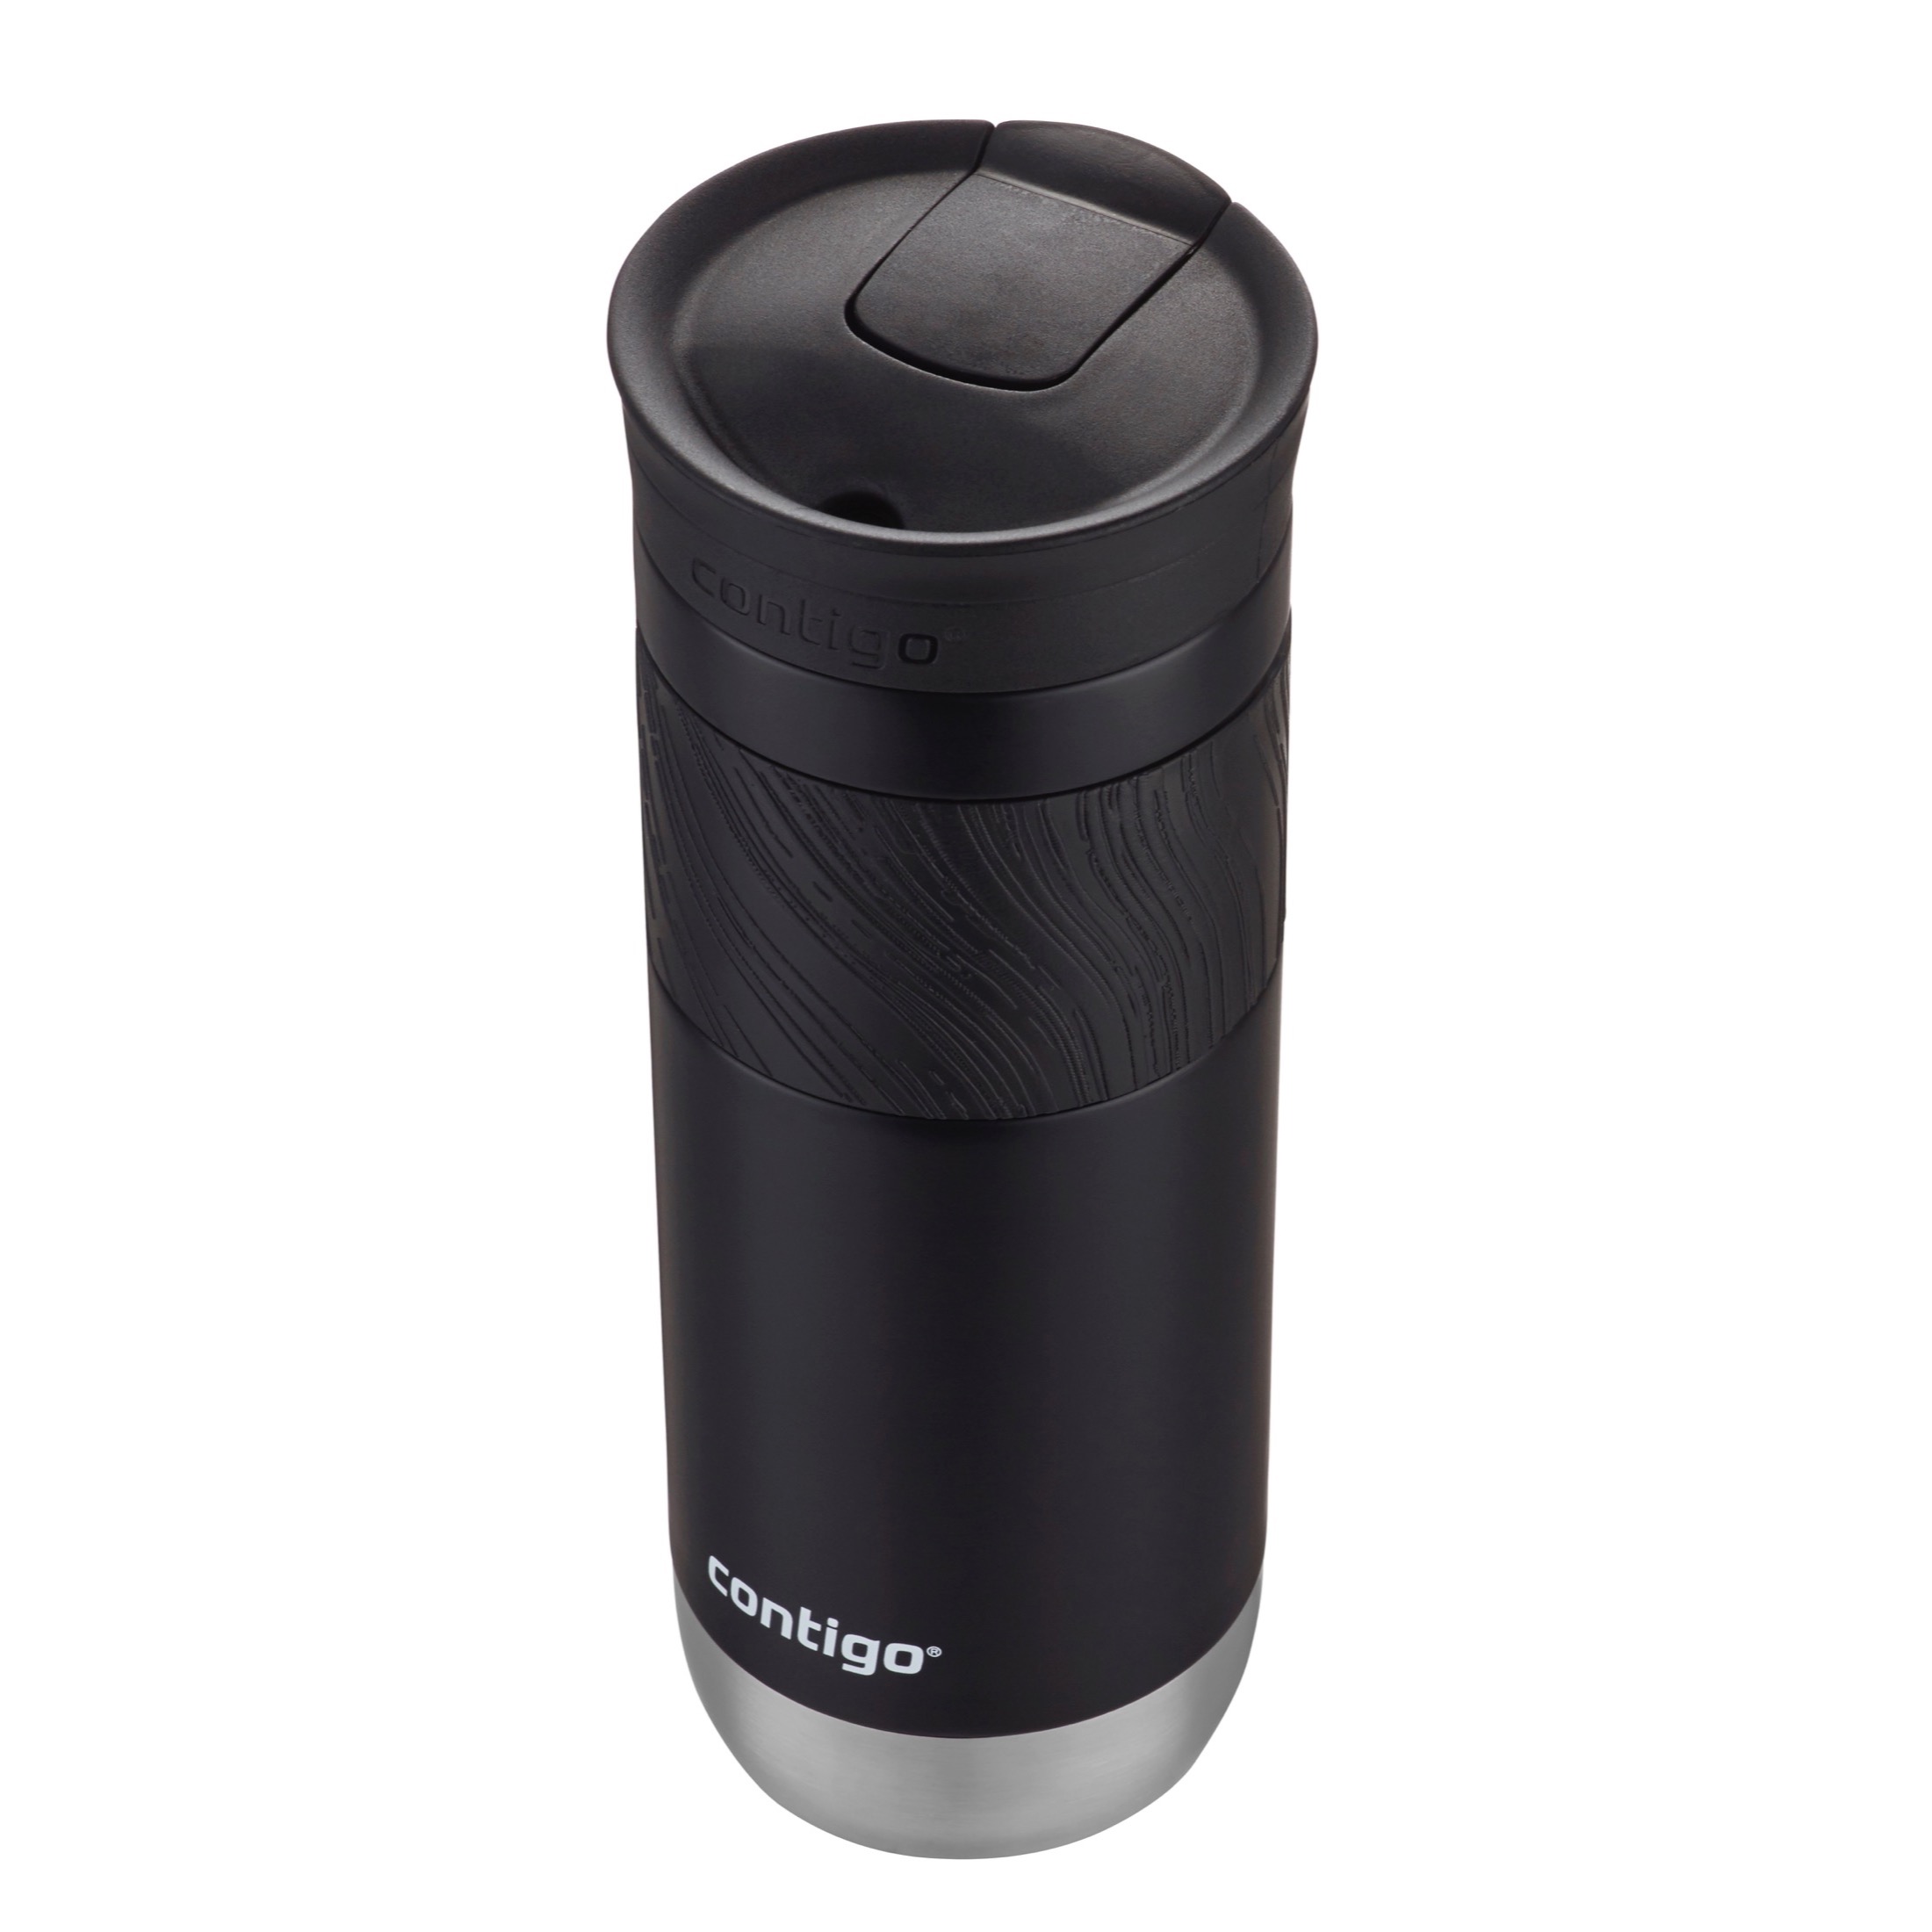 Contigo Byron 2.0 Stainless Steel Travel Mug with SNAPSEAL Lid in Black Licorice, 20 fl oz. - image 4 of 4